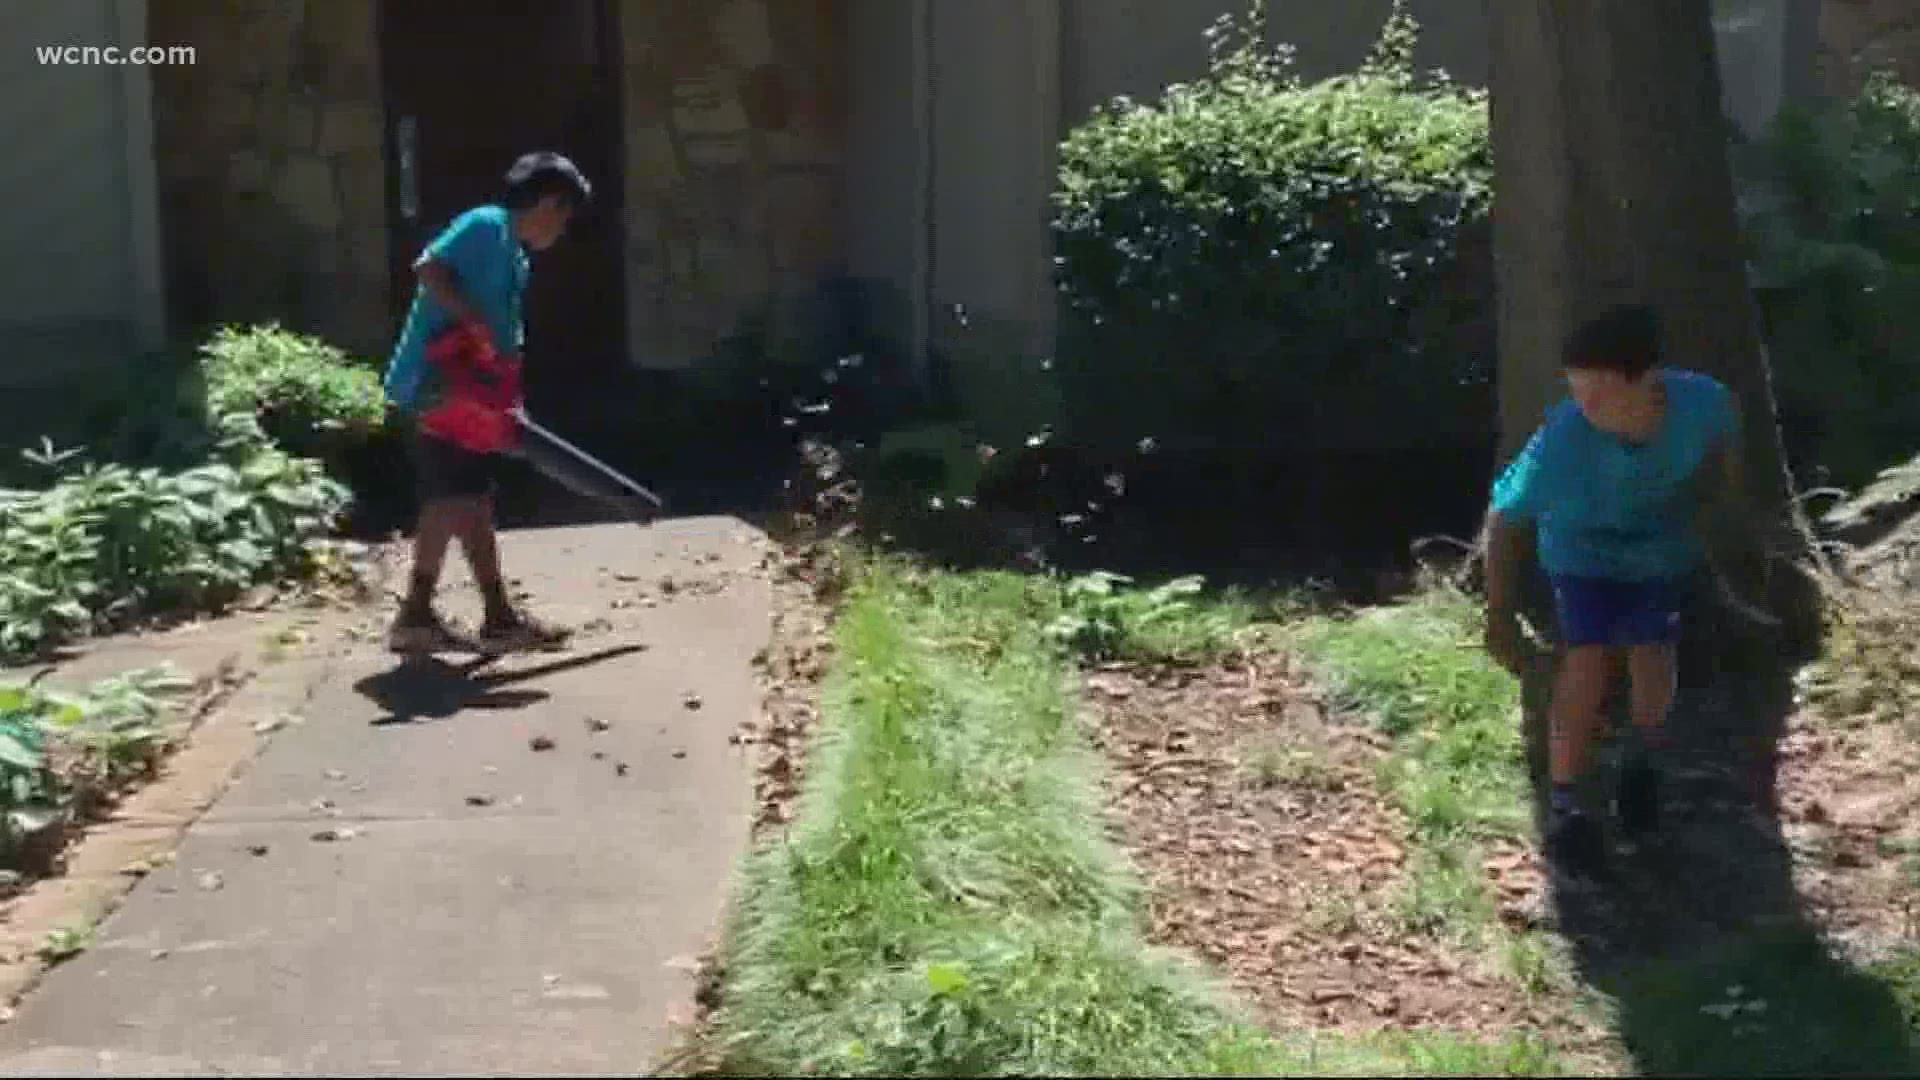 Two boys inspired by a social media challenge are doing good this summer. Plus, an animal shelter uses TikTok to find homes for pets.